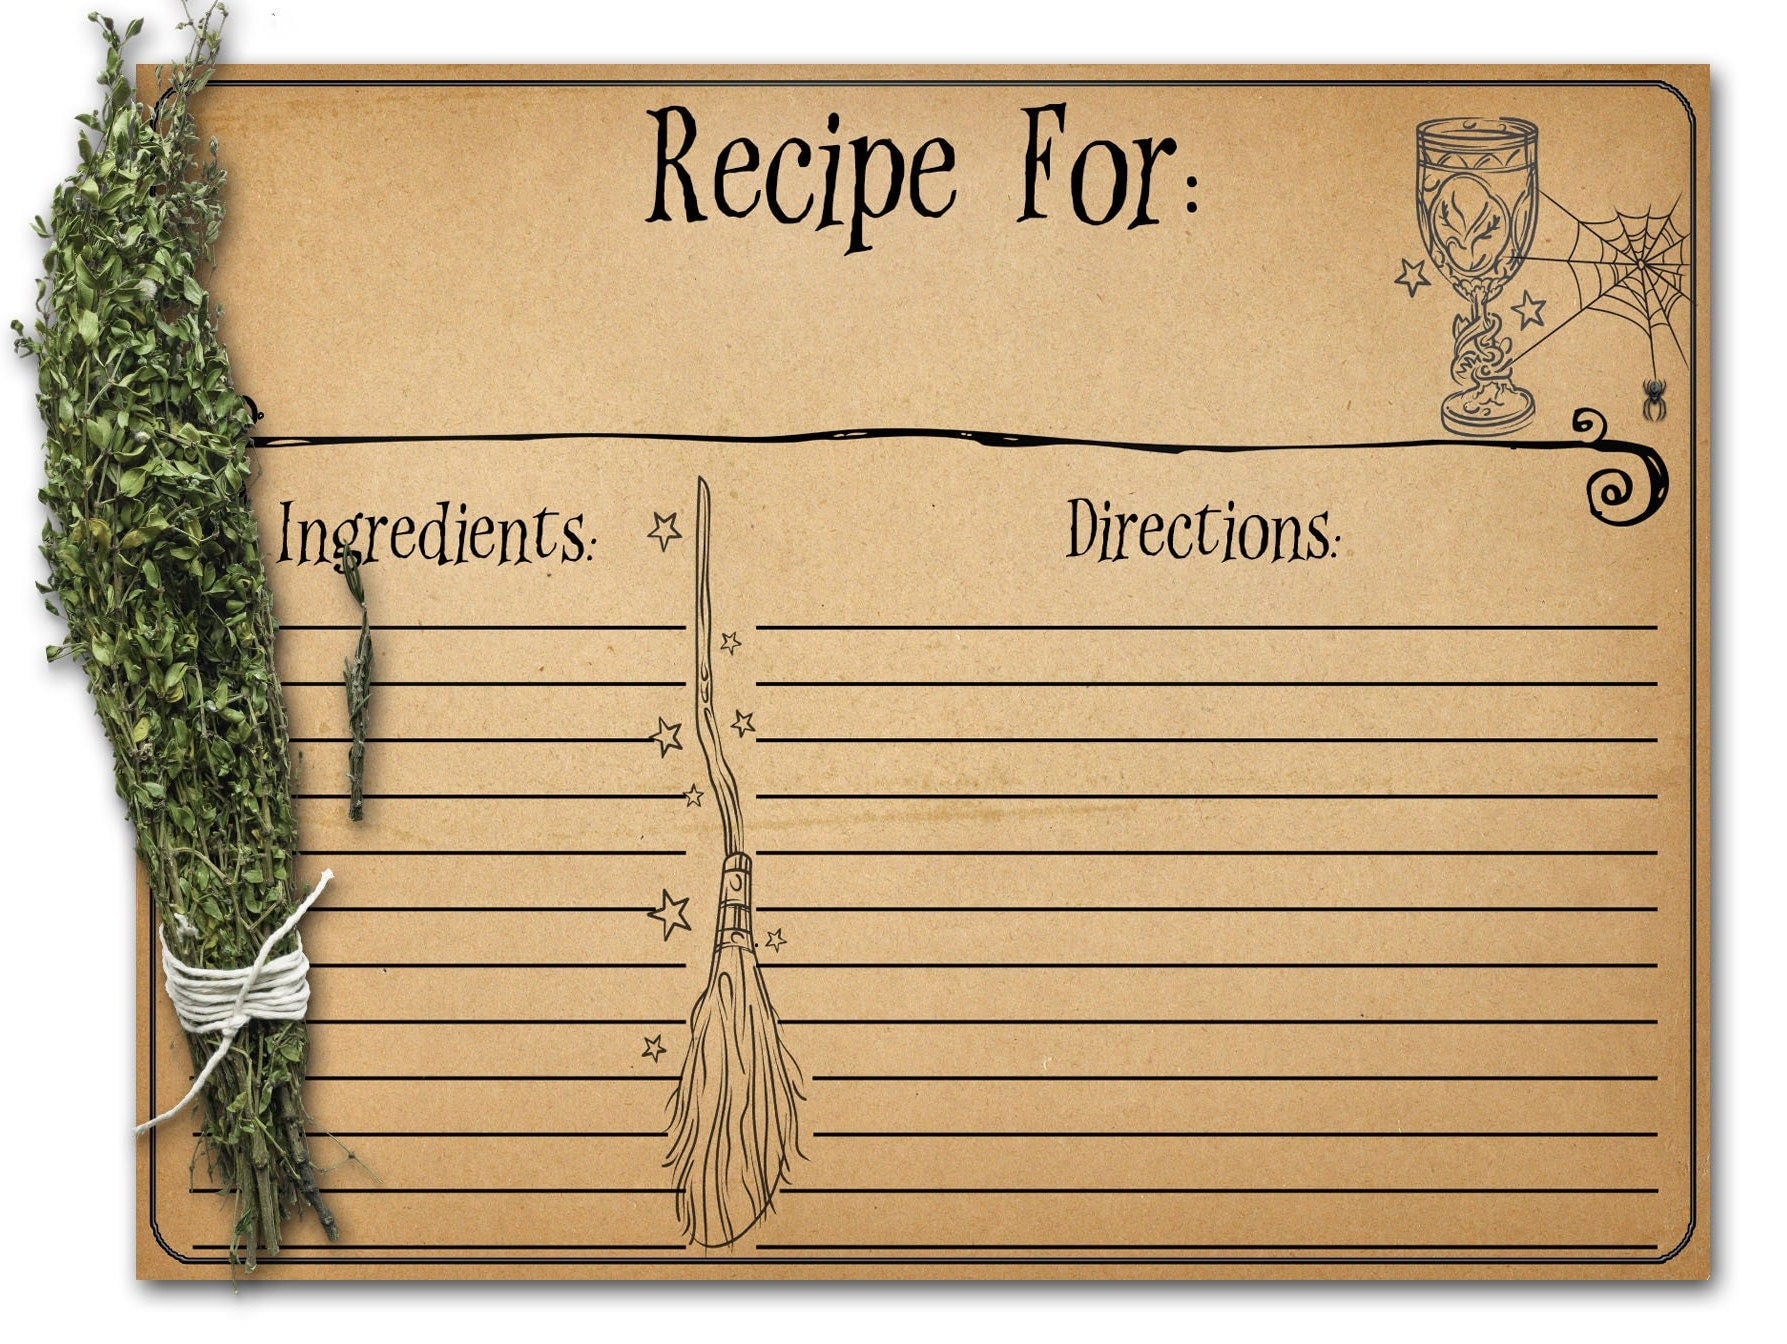 PARCHMENT WITCH RECIPE CARD Kitchen Witch Spell Cards, Recipe Card Templates, Write Down your Spells, Wicca Witchcraft Magic diary Journal cards - Morgana Magick Spell